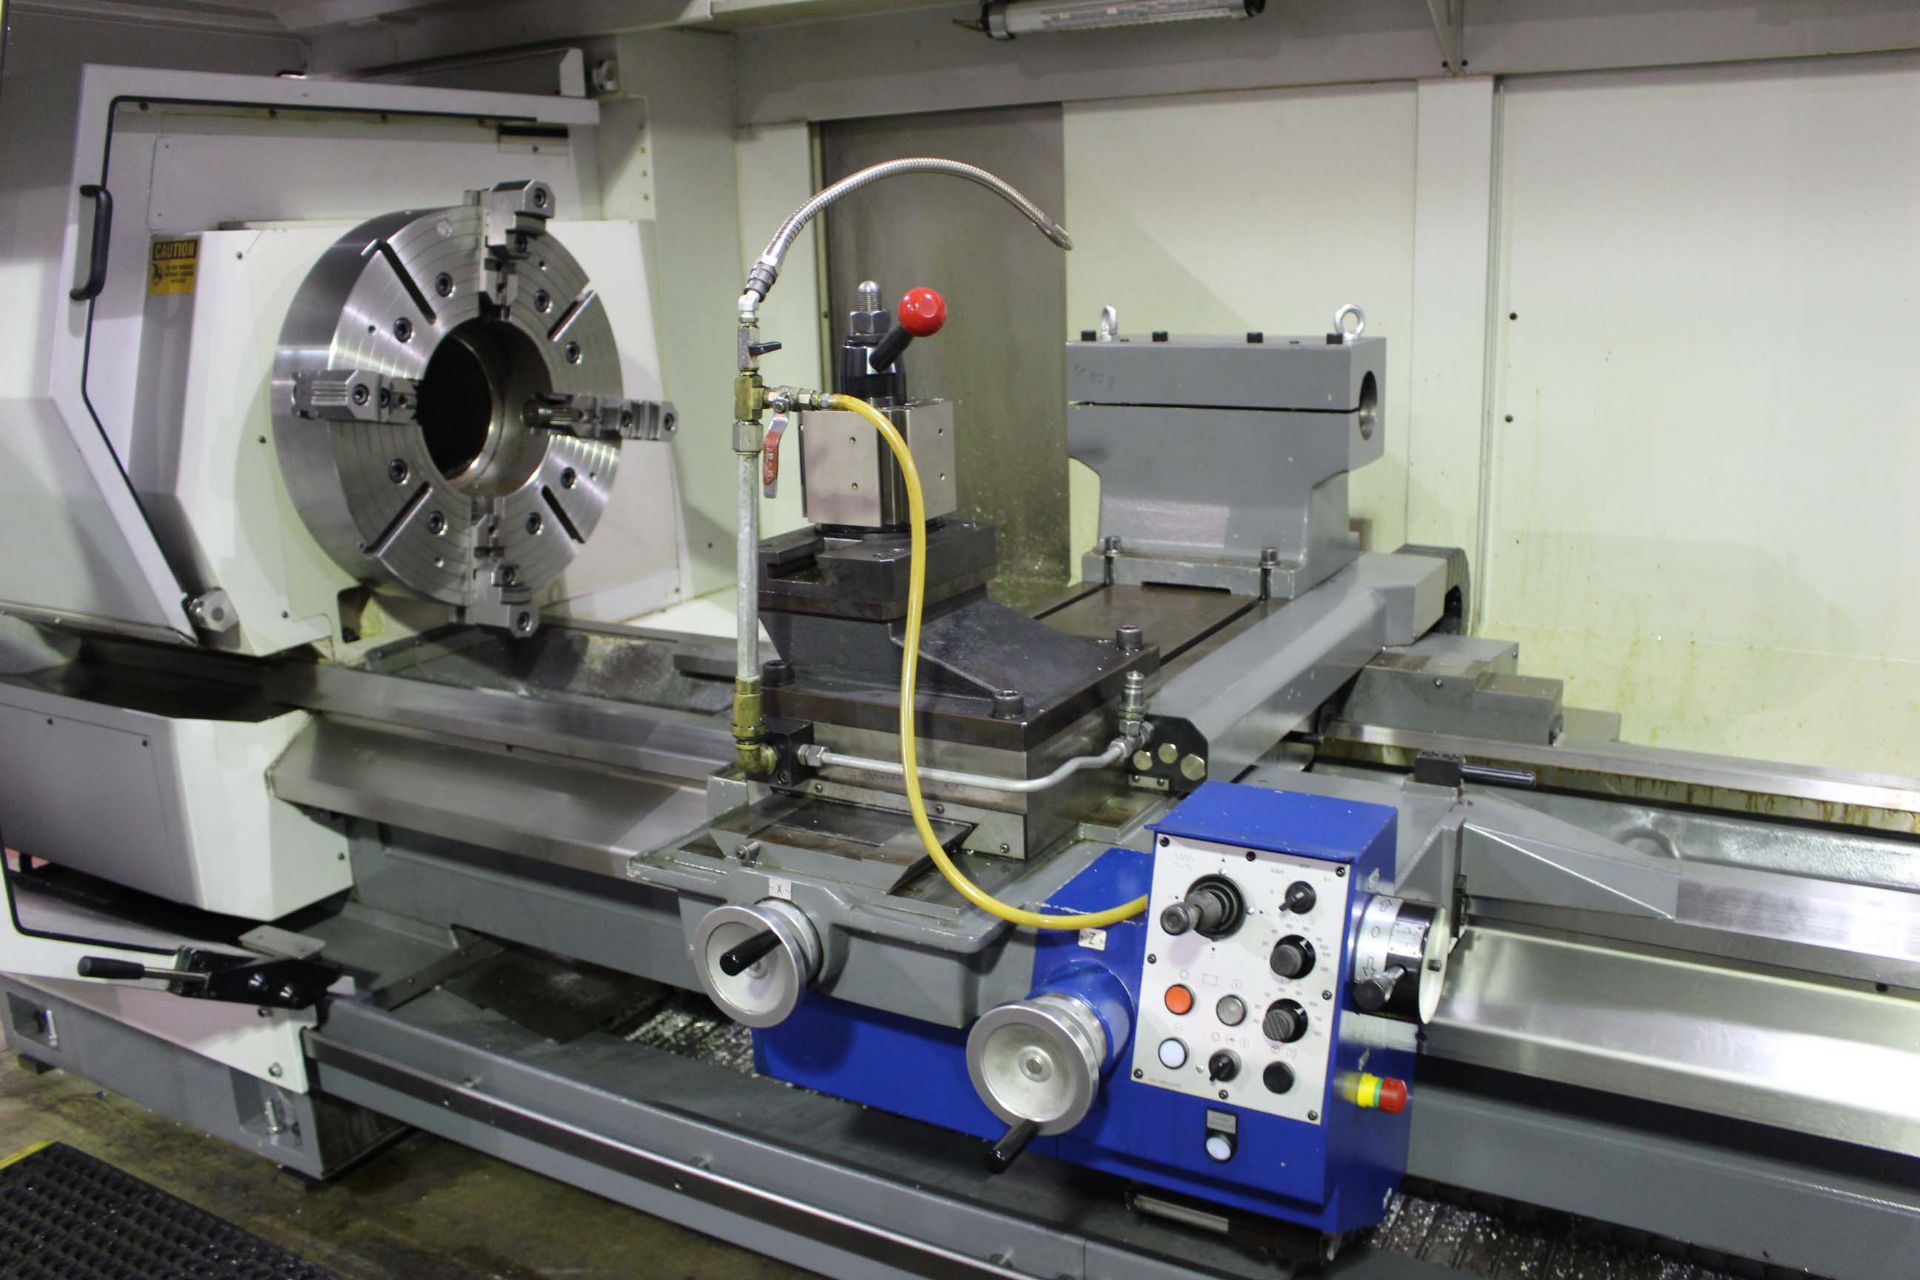 CNC HOLLOW SPINDLE LATHE, WEILER MDL. E90X3000, new 2013, Weiler/Siemens electronic control, 35.4" - Image 2 of 9